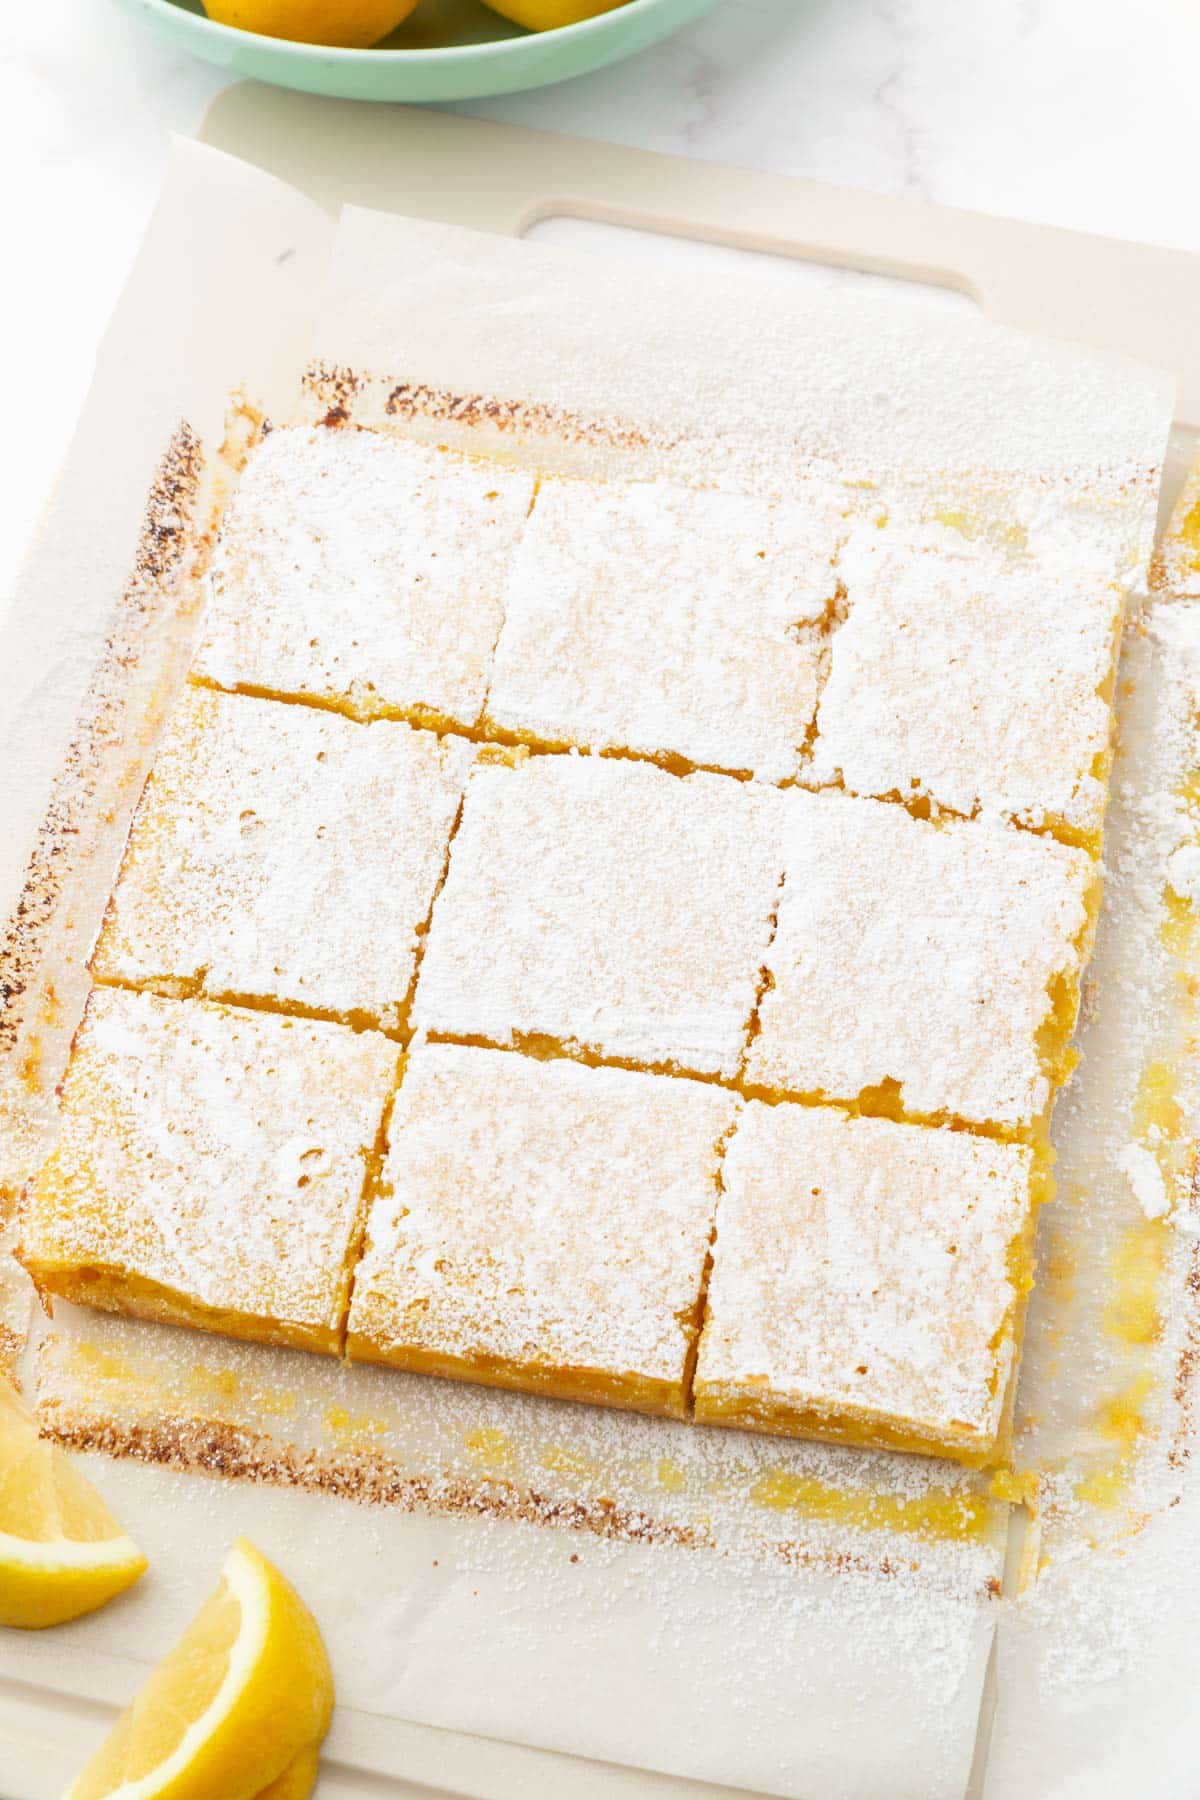 A large slab of gluten free lemon squares cut into 9 equal squares on a cutting board and dusted with powdered sugar.